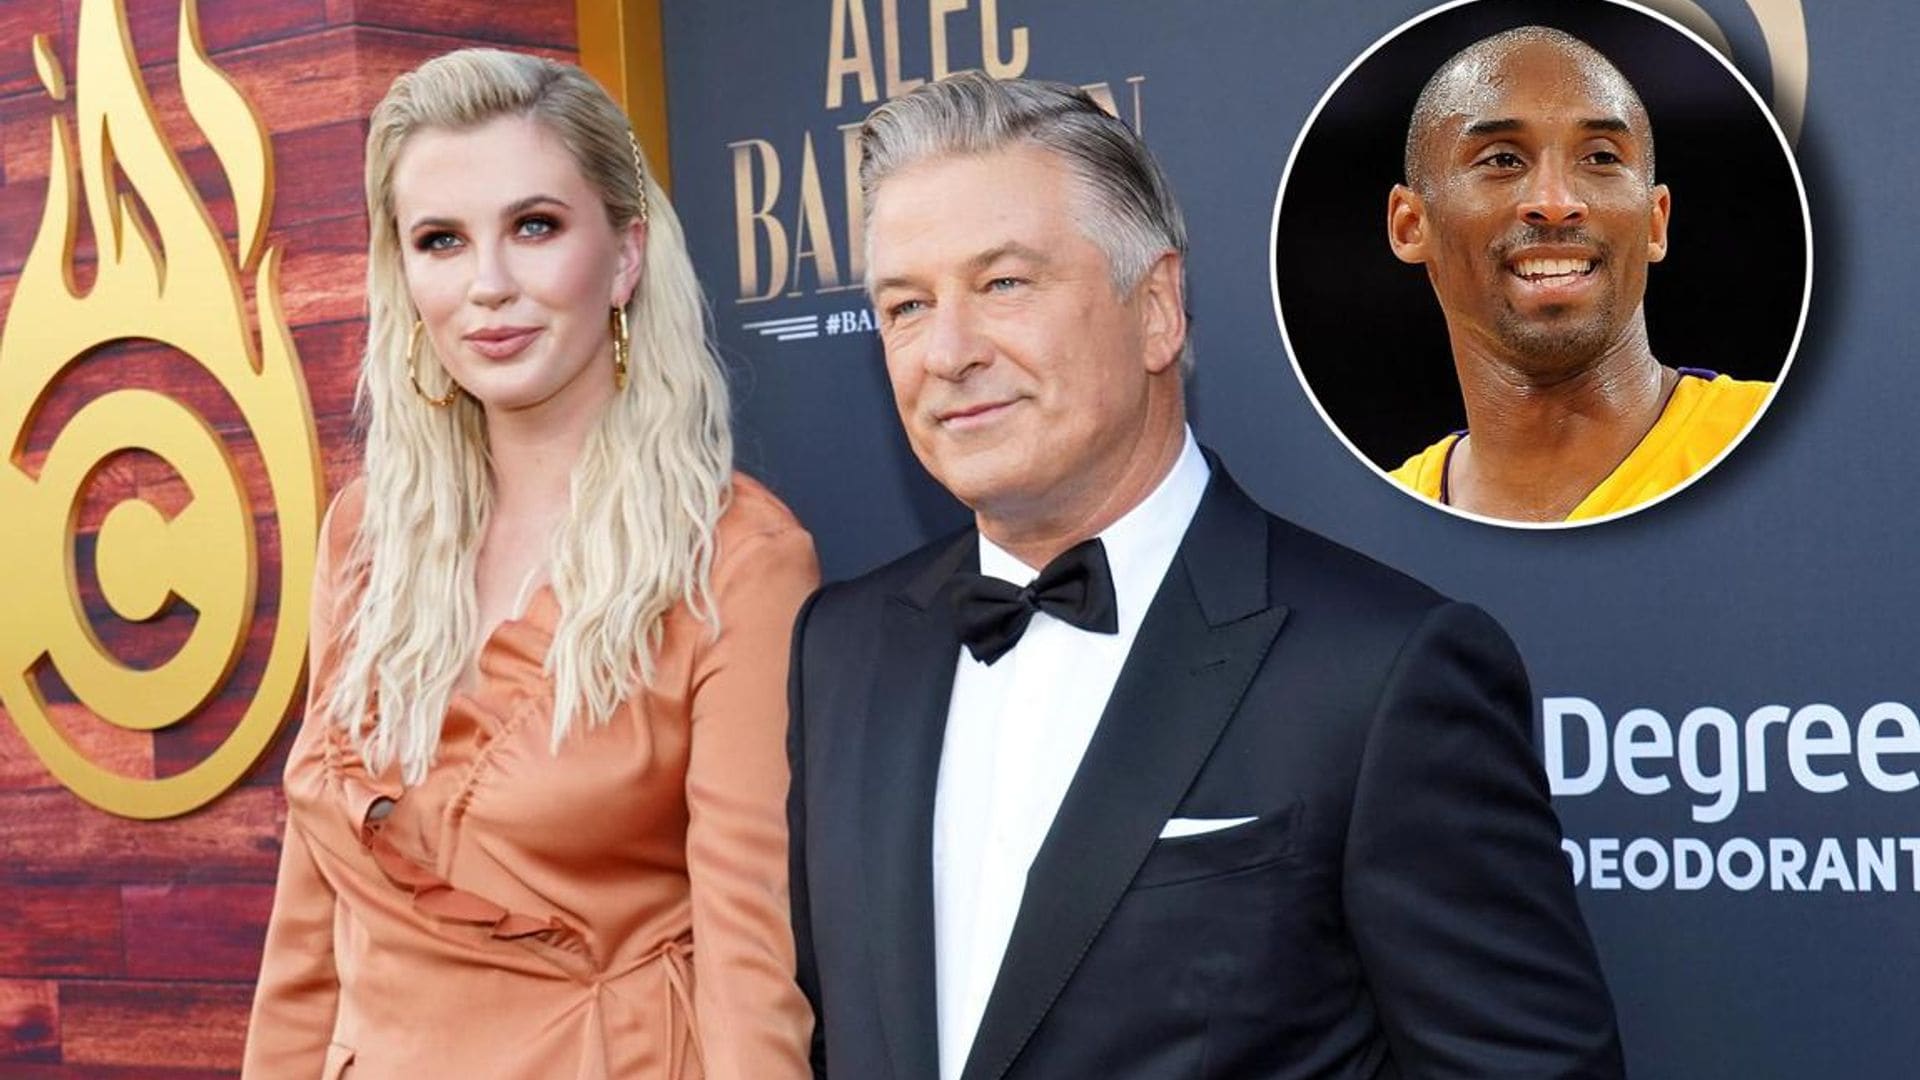 Alec Baldwin’s daughter admits Kobe Bryant's death has changed her view on relationship with dad